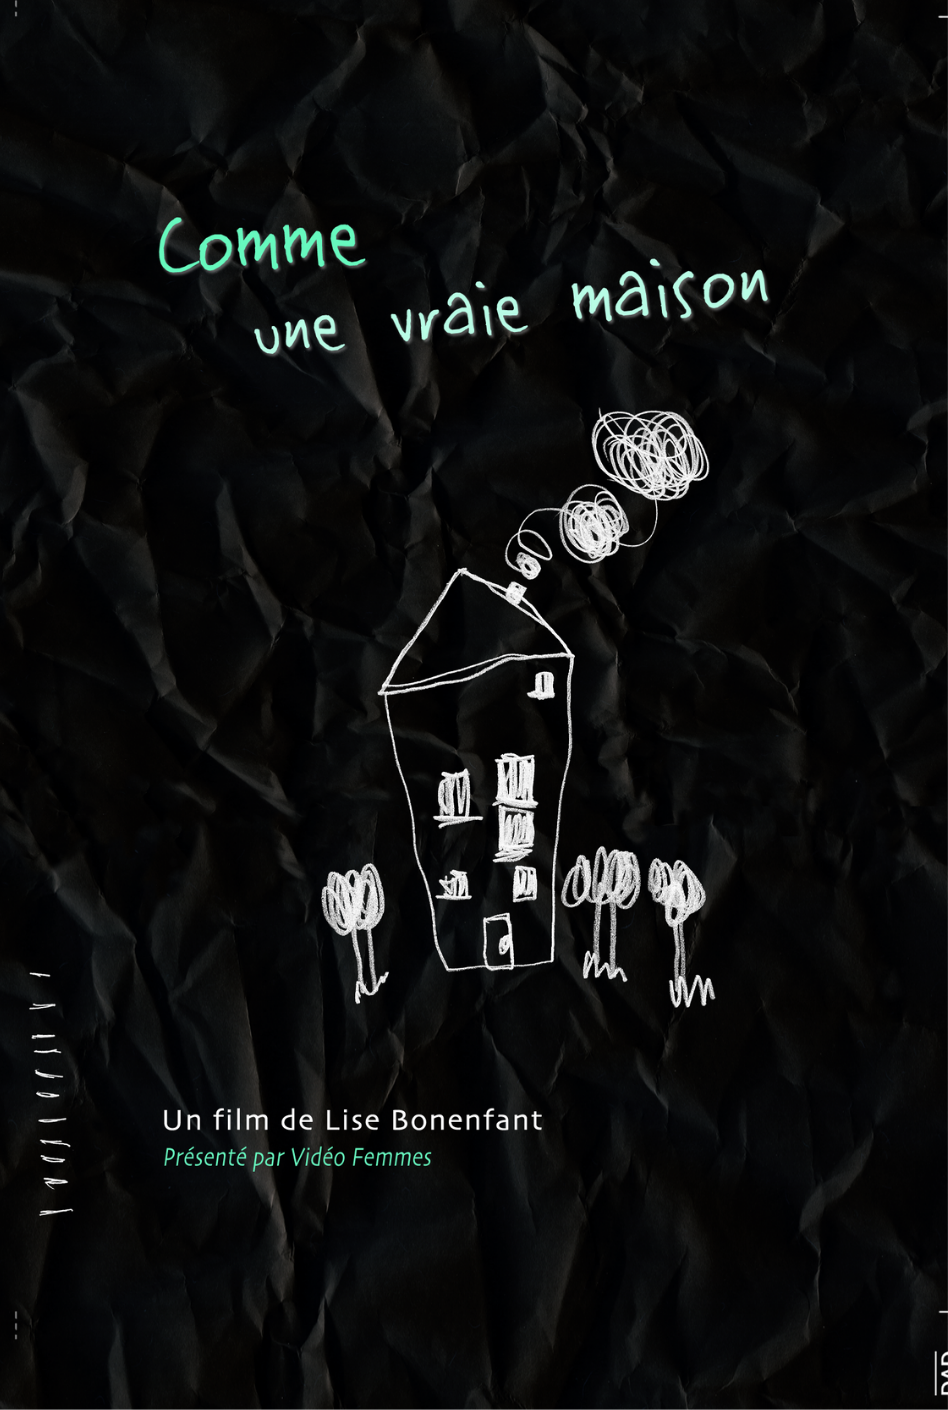 images/bottin_films/fadeb4c9bffca99fbfc10fd24daf2605-Comme-une-vraie-maison-web.png#joomlaImage://local-images/bottin_films/fadeb4c9bffca99fbfc10fd24daf2605-Comme-une-vraie-maison-web.png?width=948&height=1410